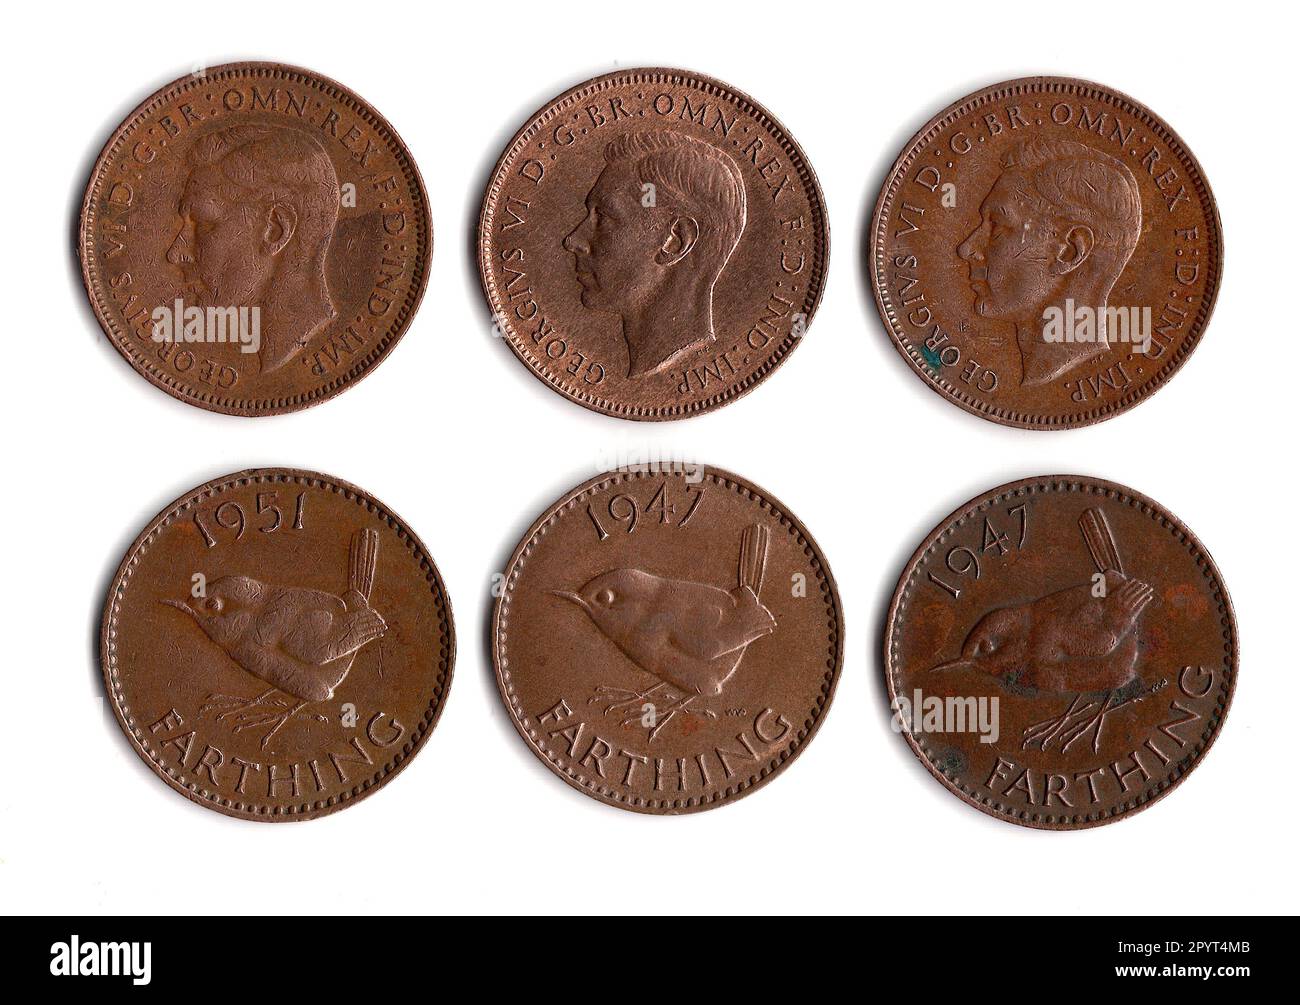 King George VI vintage farthings from Great Britain showing the front and reverse. Stock Photo